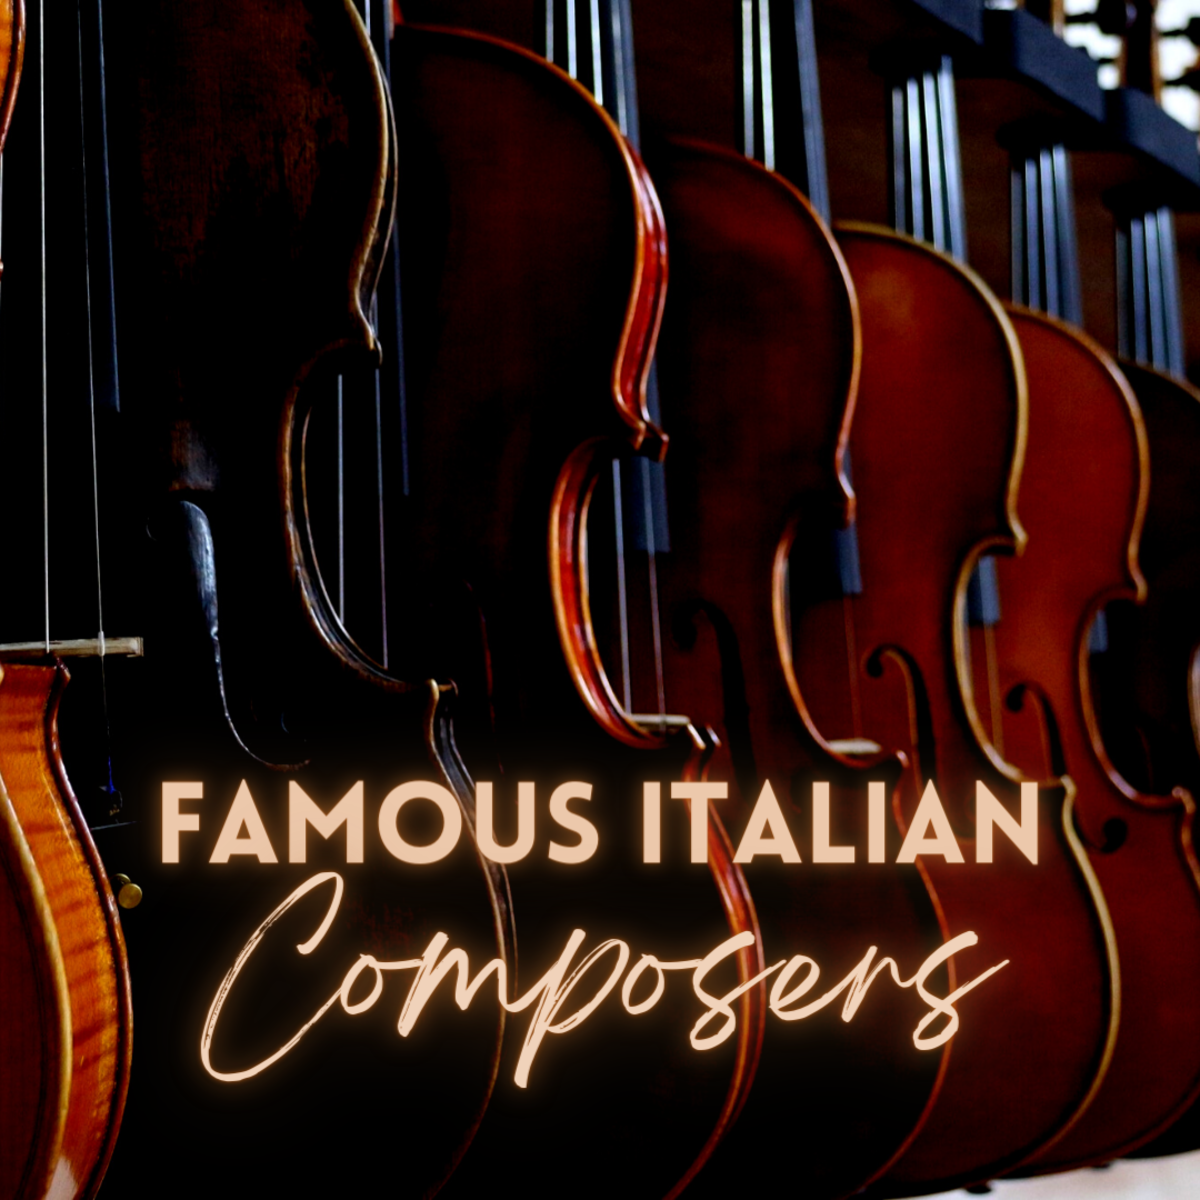 Read about six famous Italian composers of classical music!